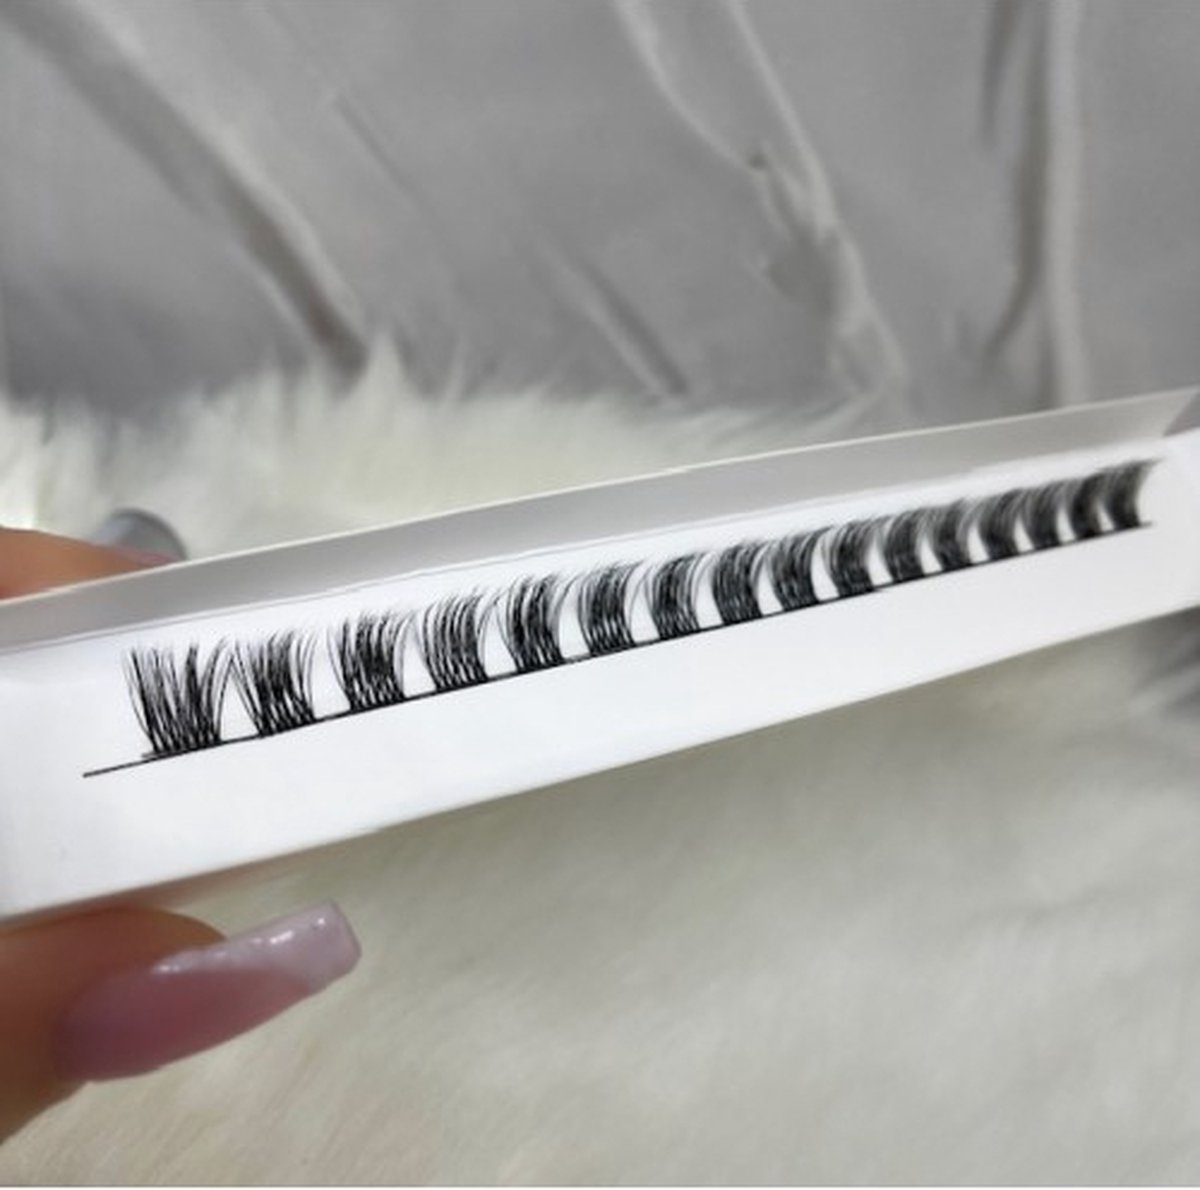 EHHbeauty - Wimpers - Wimperextensions - Lashes - Naturel- 14mm - Cluster - Diy lashes - Stukjes wimper